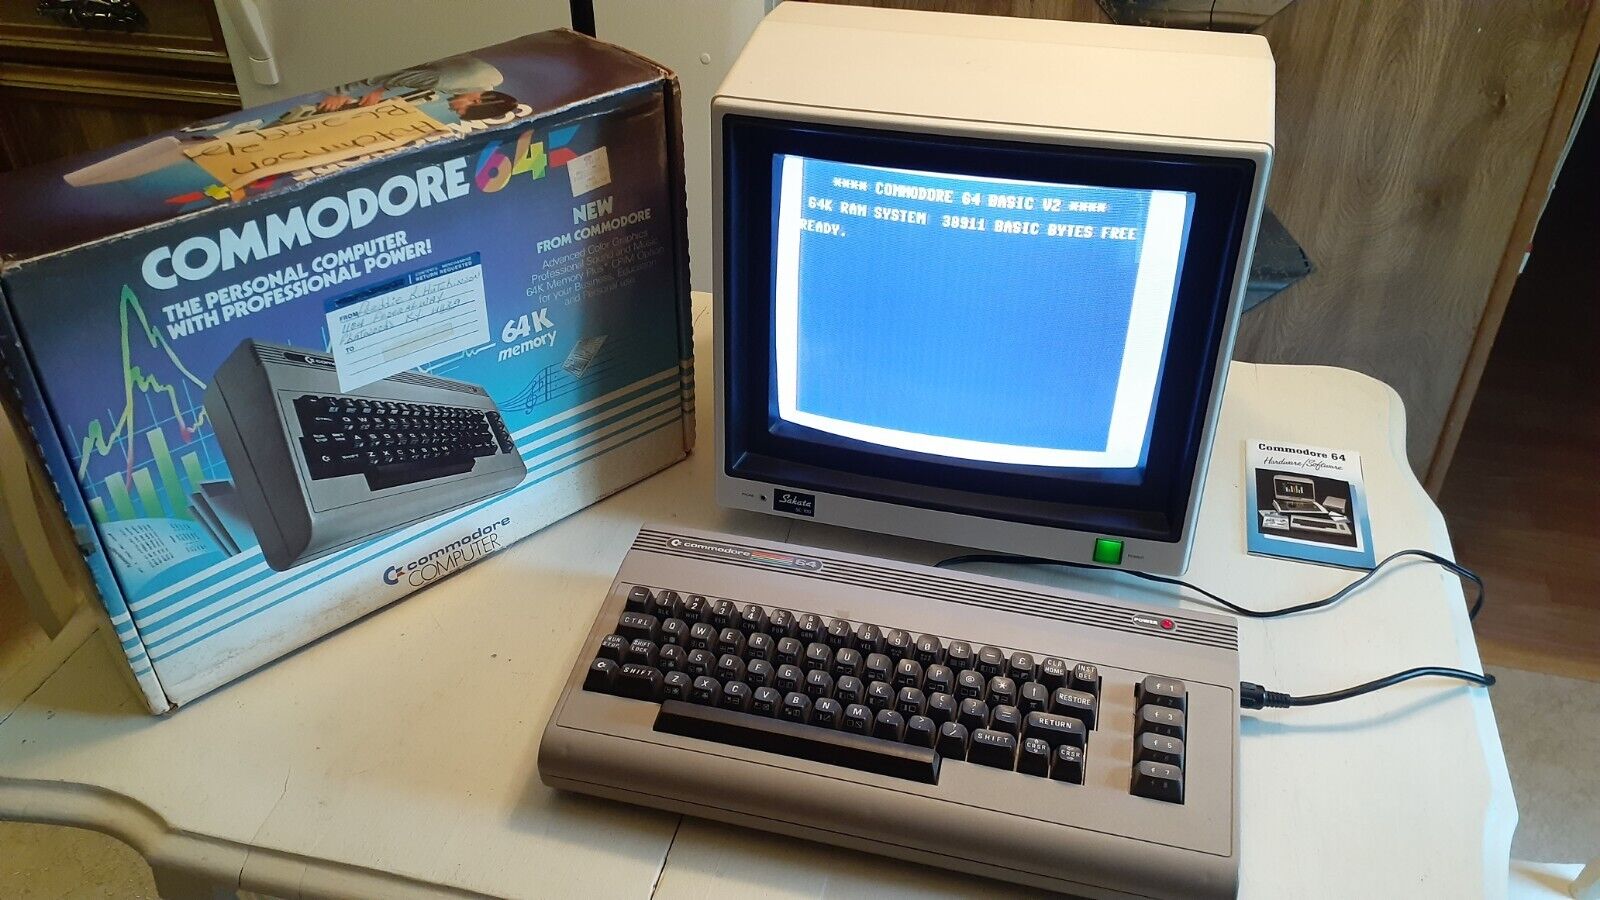 Commodore 64 Personal Computer Keyboard W/Box, Power Cord, Tested/Works